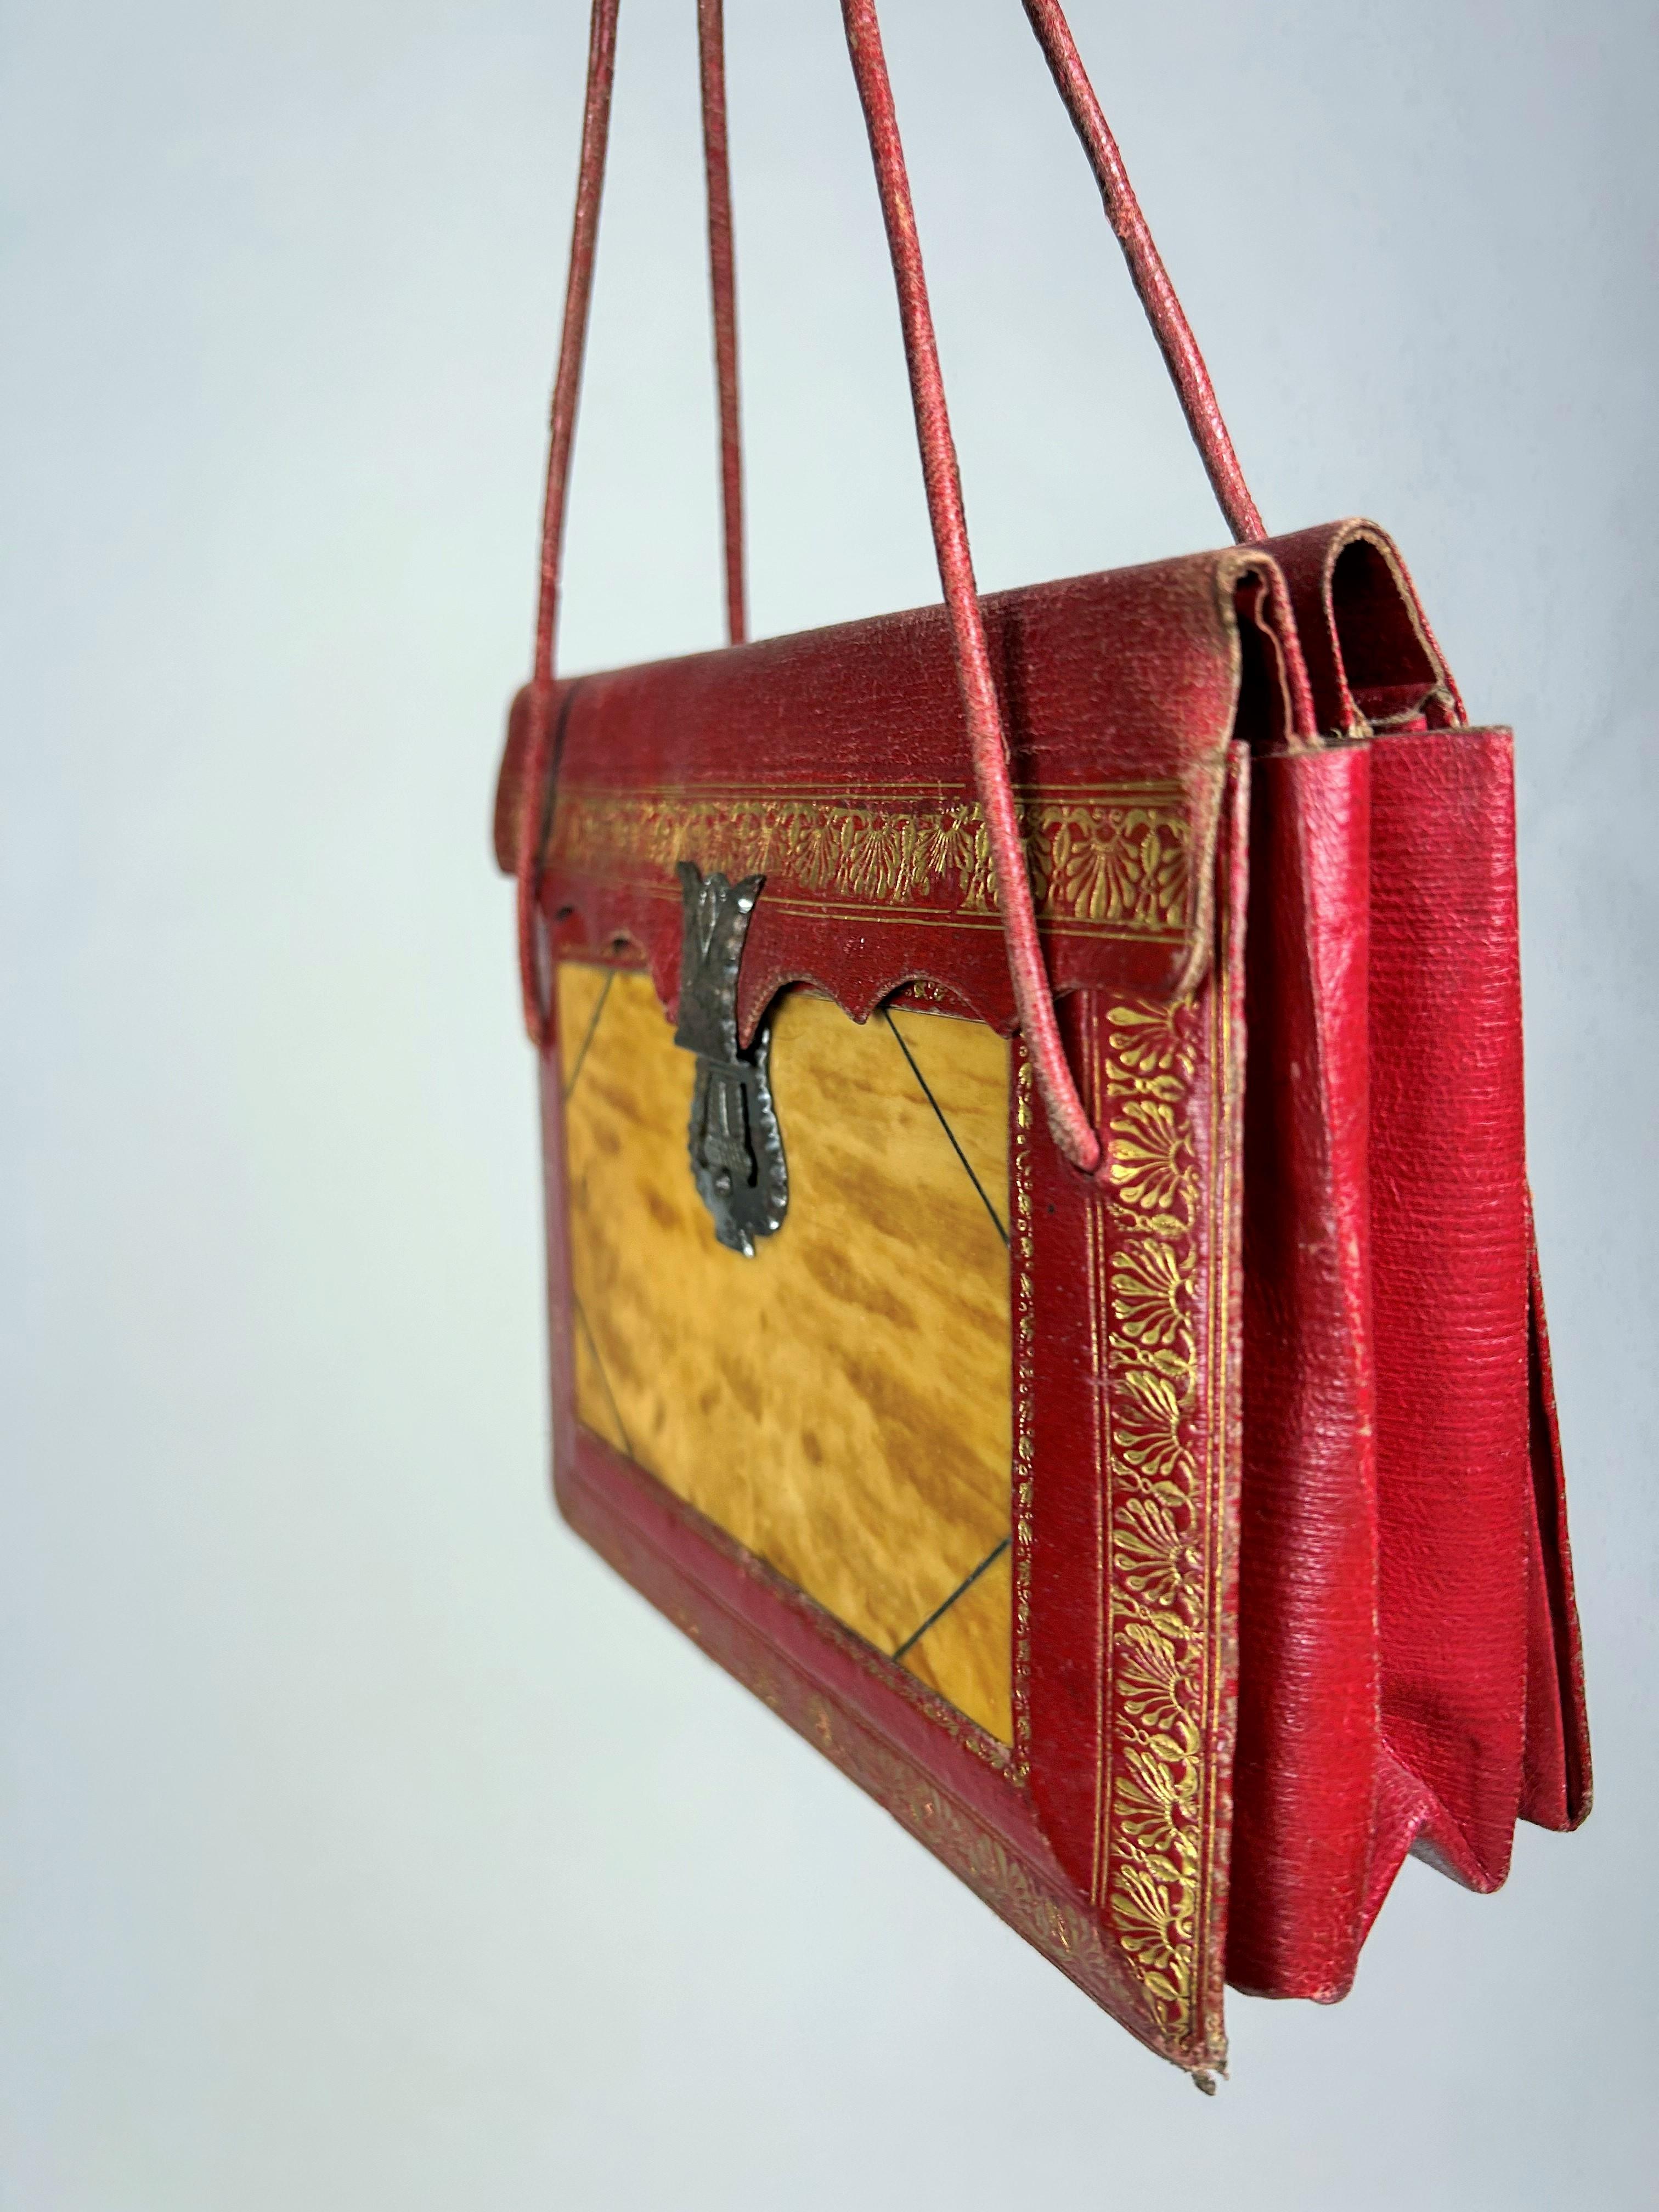 A precious red Leather Reticule with tortoiseshell inlay - England Dated 1836 For Sale 1